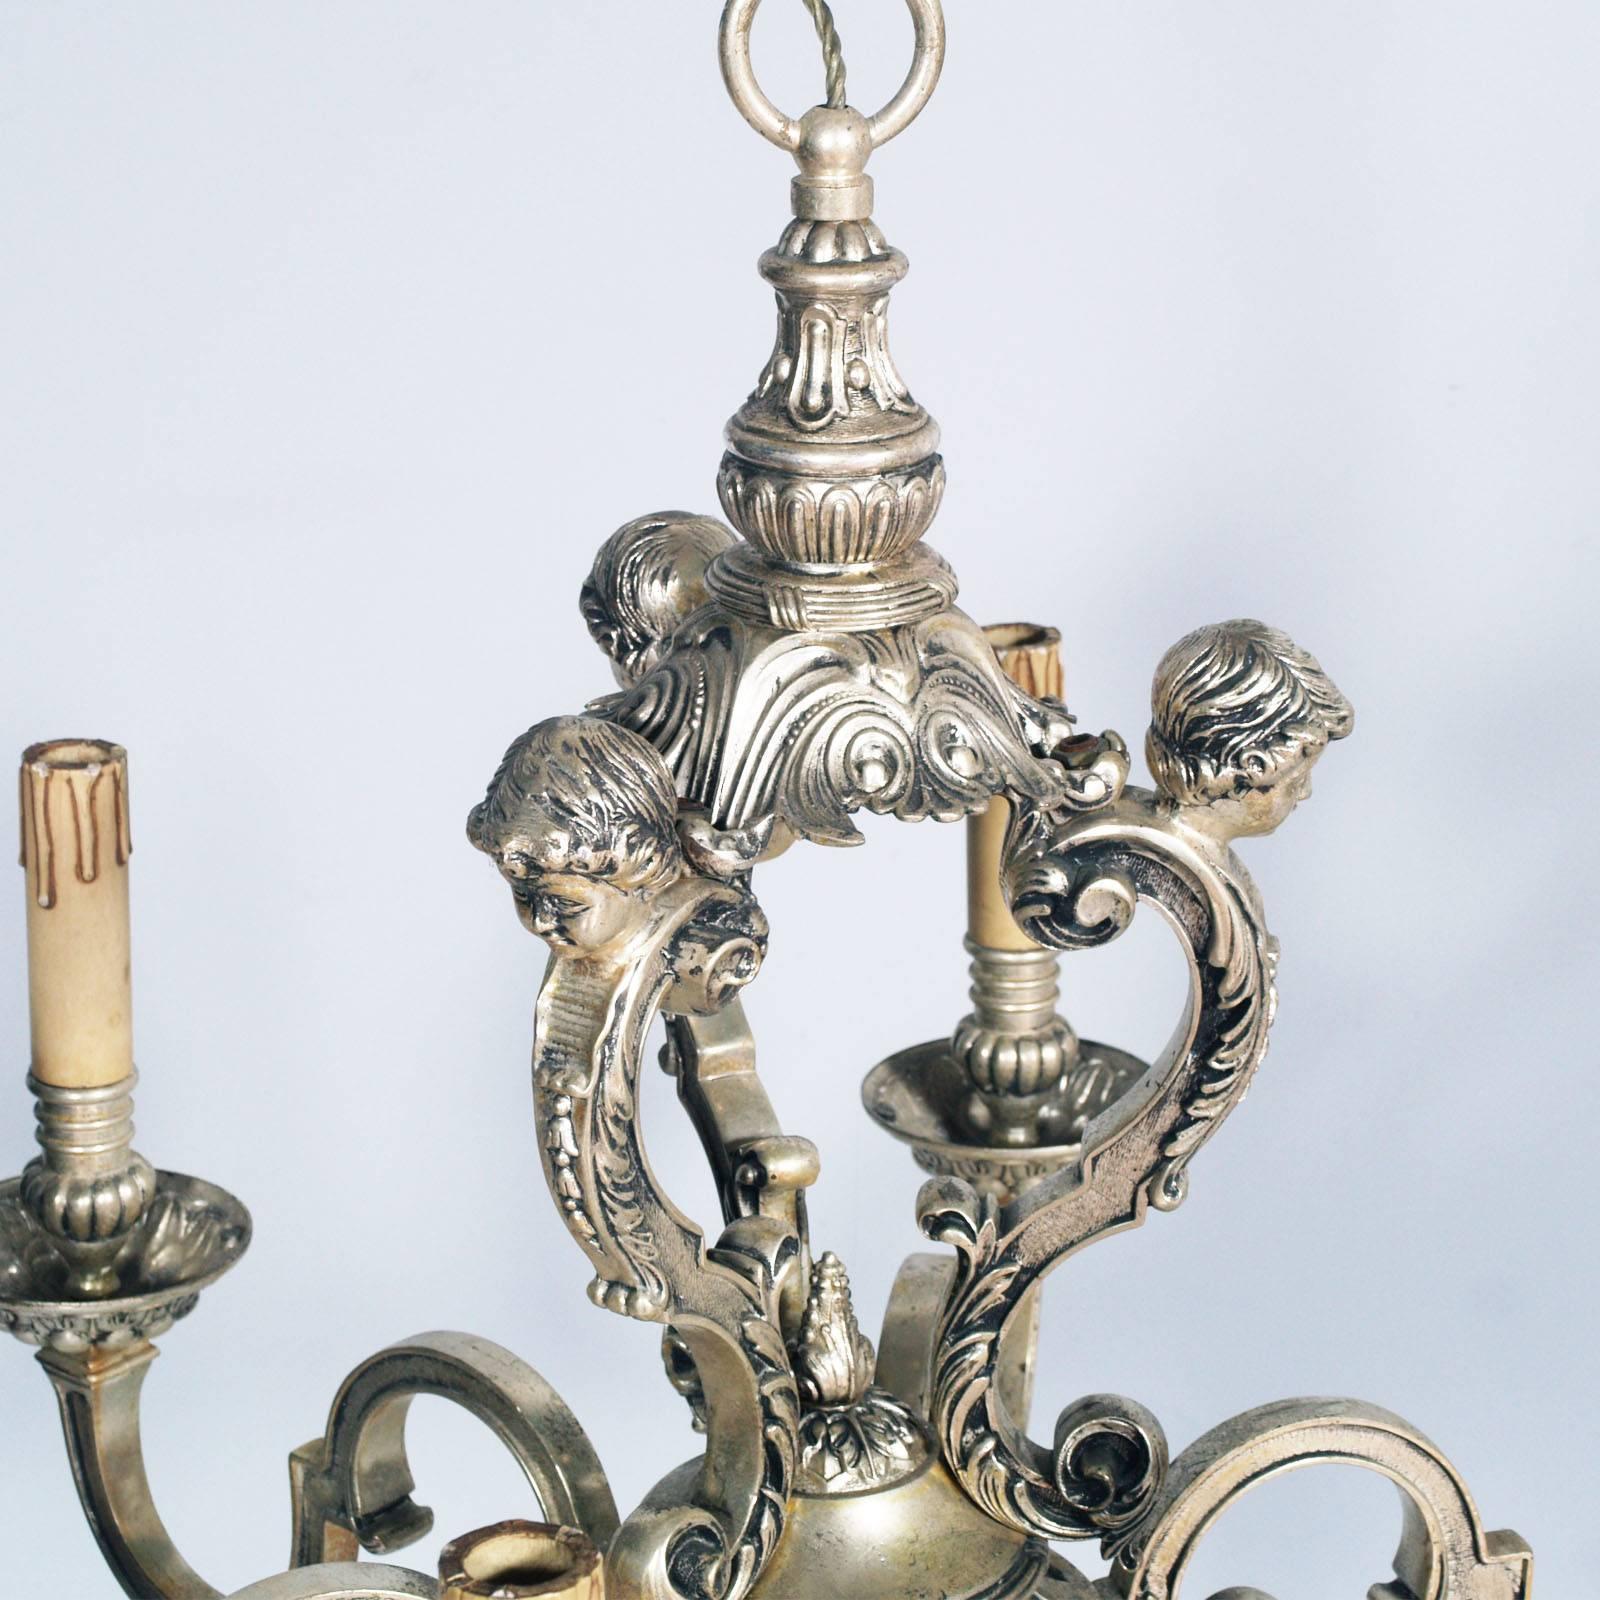 Antique French six lights chandelier exceptionally fine and large, silver plated bronze chandelier. The upper section with putti over strongly scrolled arm supports, elaborately cast and chiseled with decoration. Original plated silver and